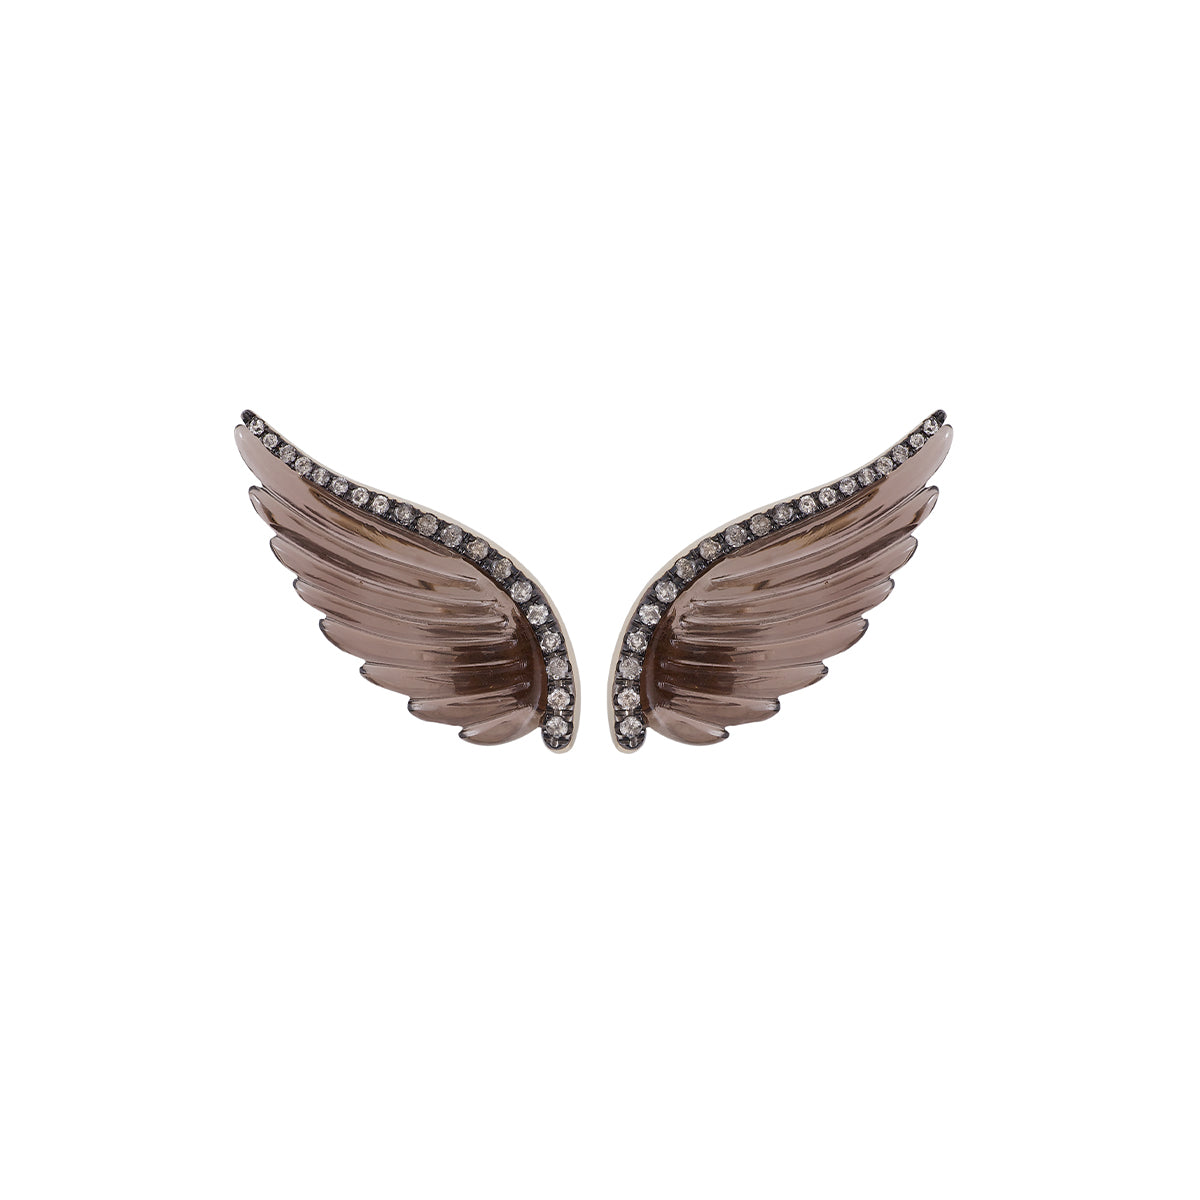 Small Wing Earpieces